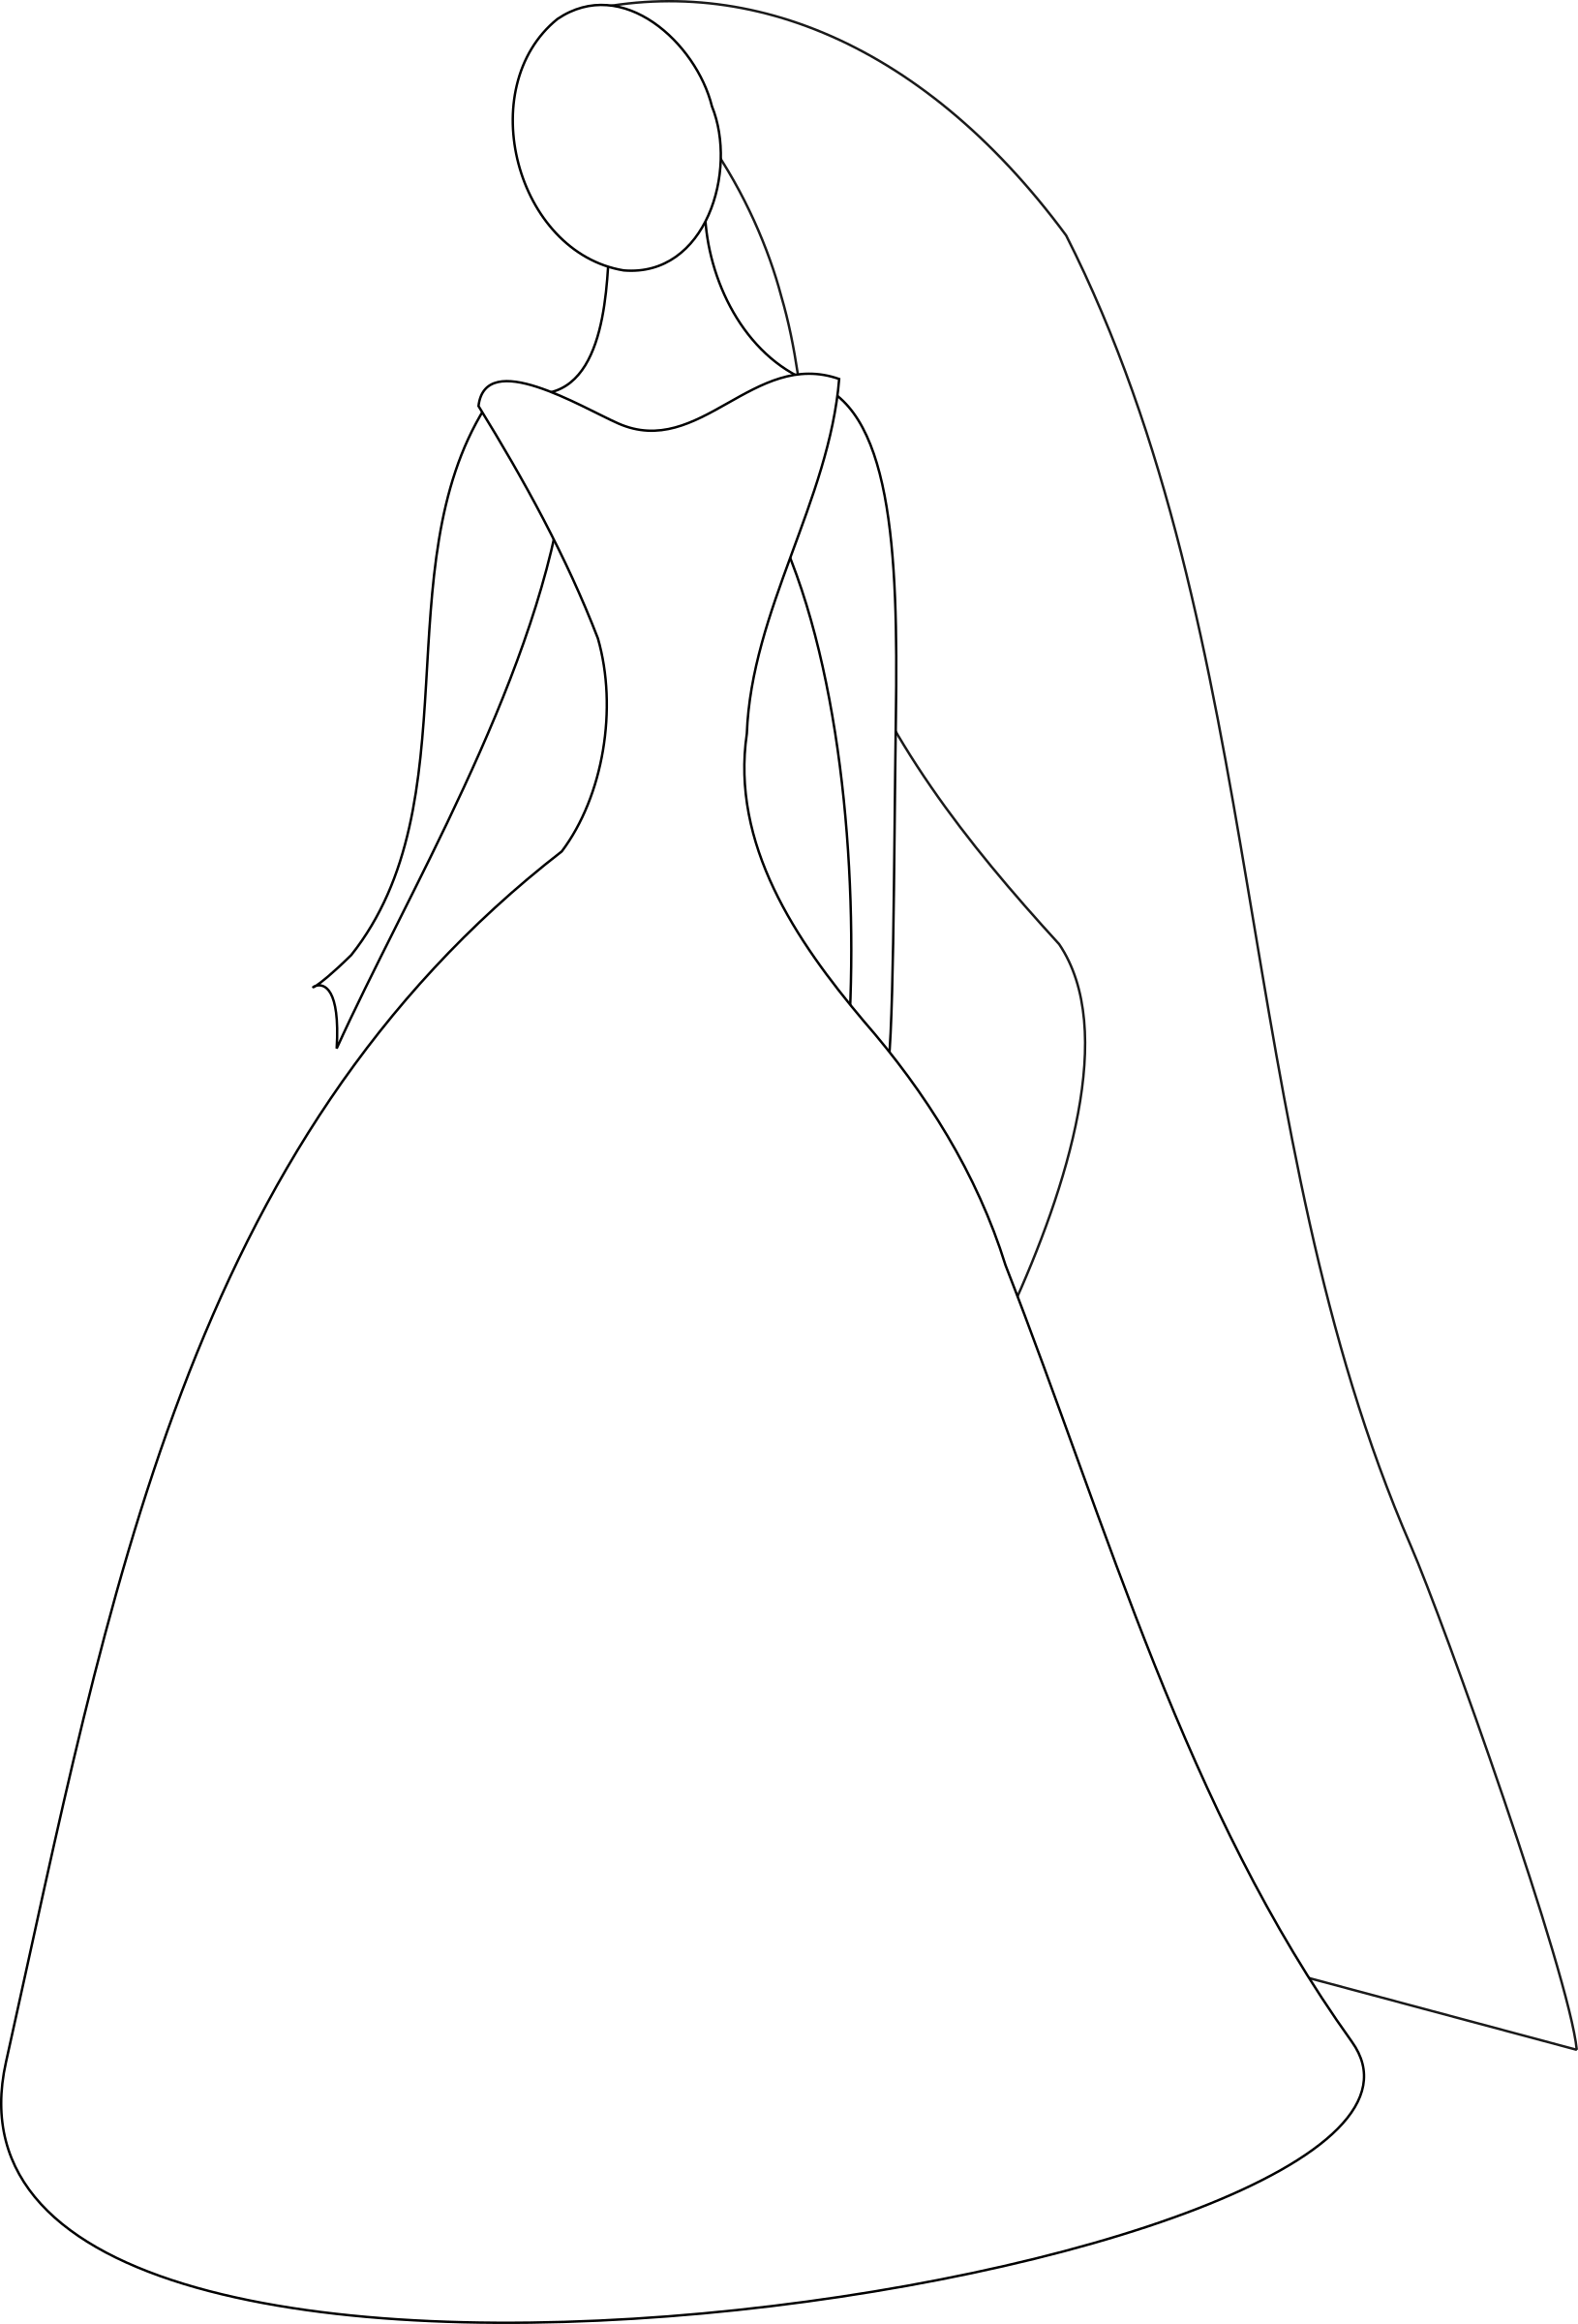 Best Ideas Of Wedding Dress Silhouettes For Your Wedding - Bride Silhouette Clip Art (1630x2400)